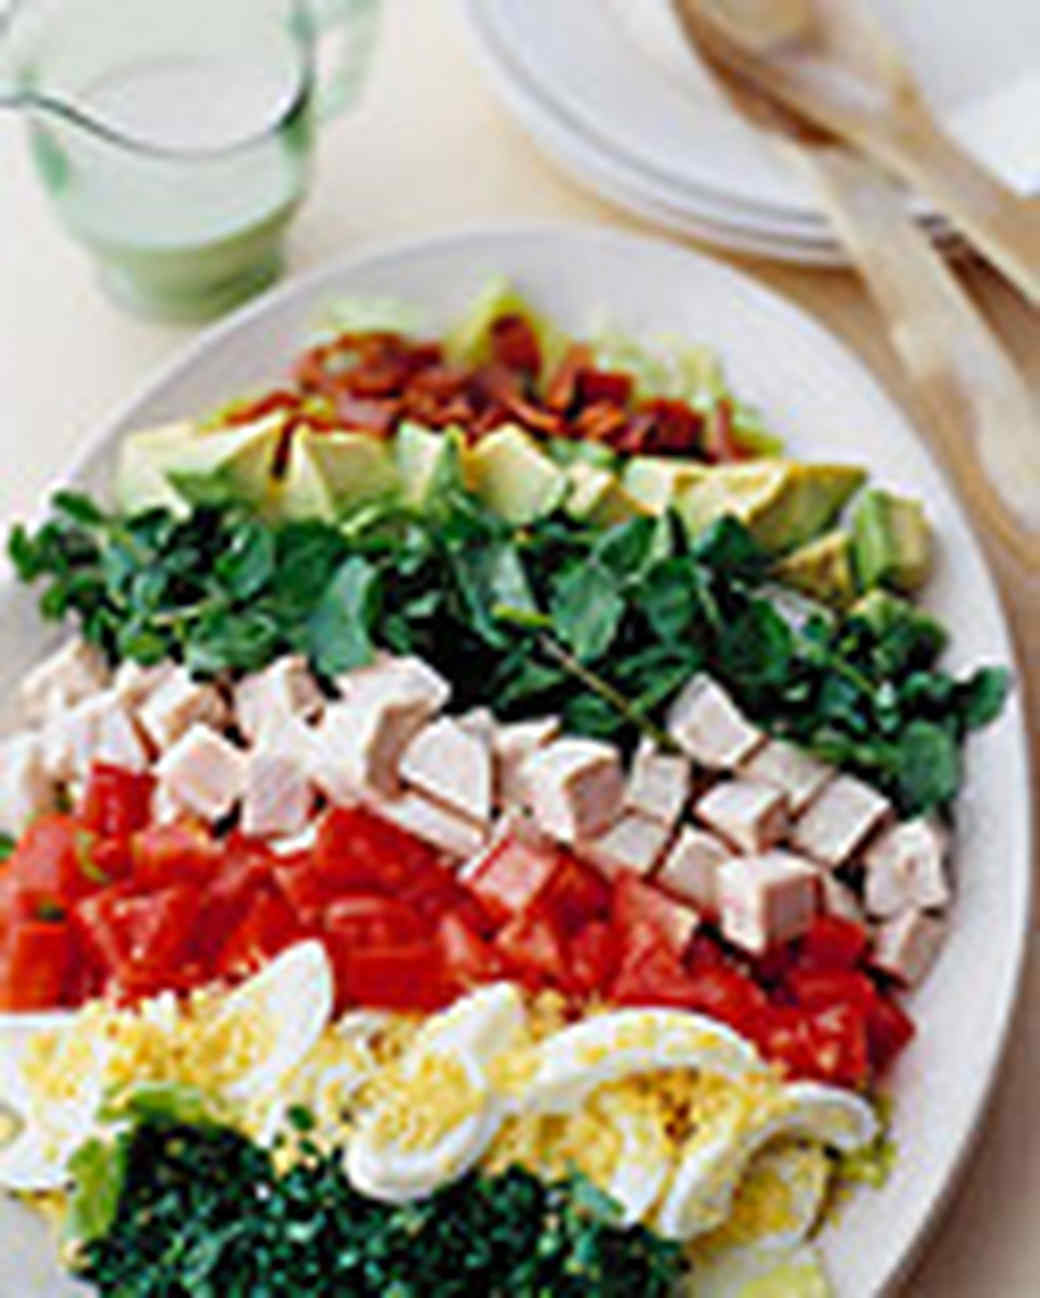 Healthy Salads Recipes 20 Of the Best Ideas for Healthy Salad Recipes Perfect for A Main or Side Dish